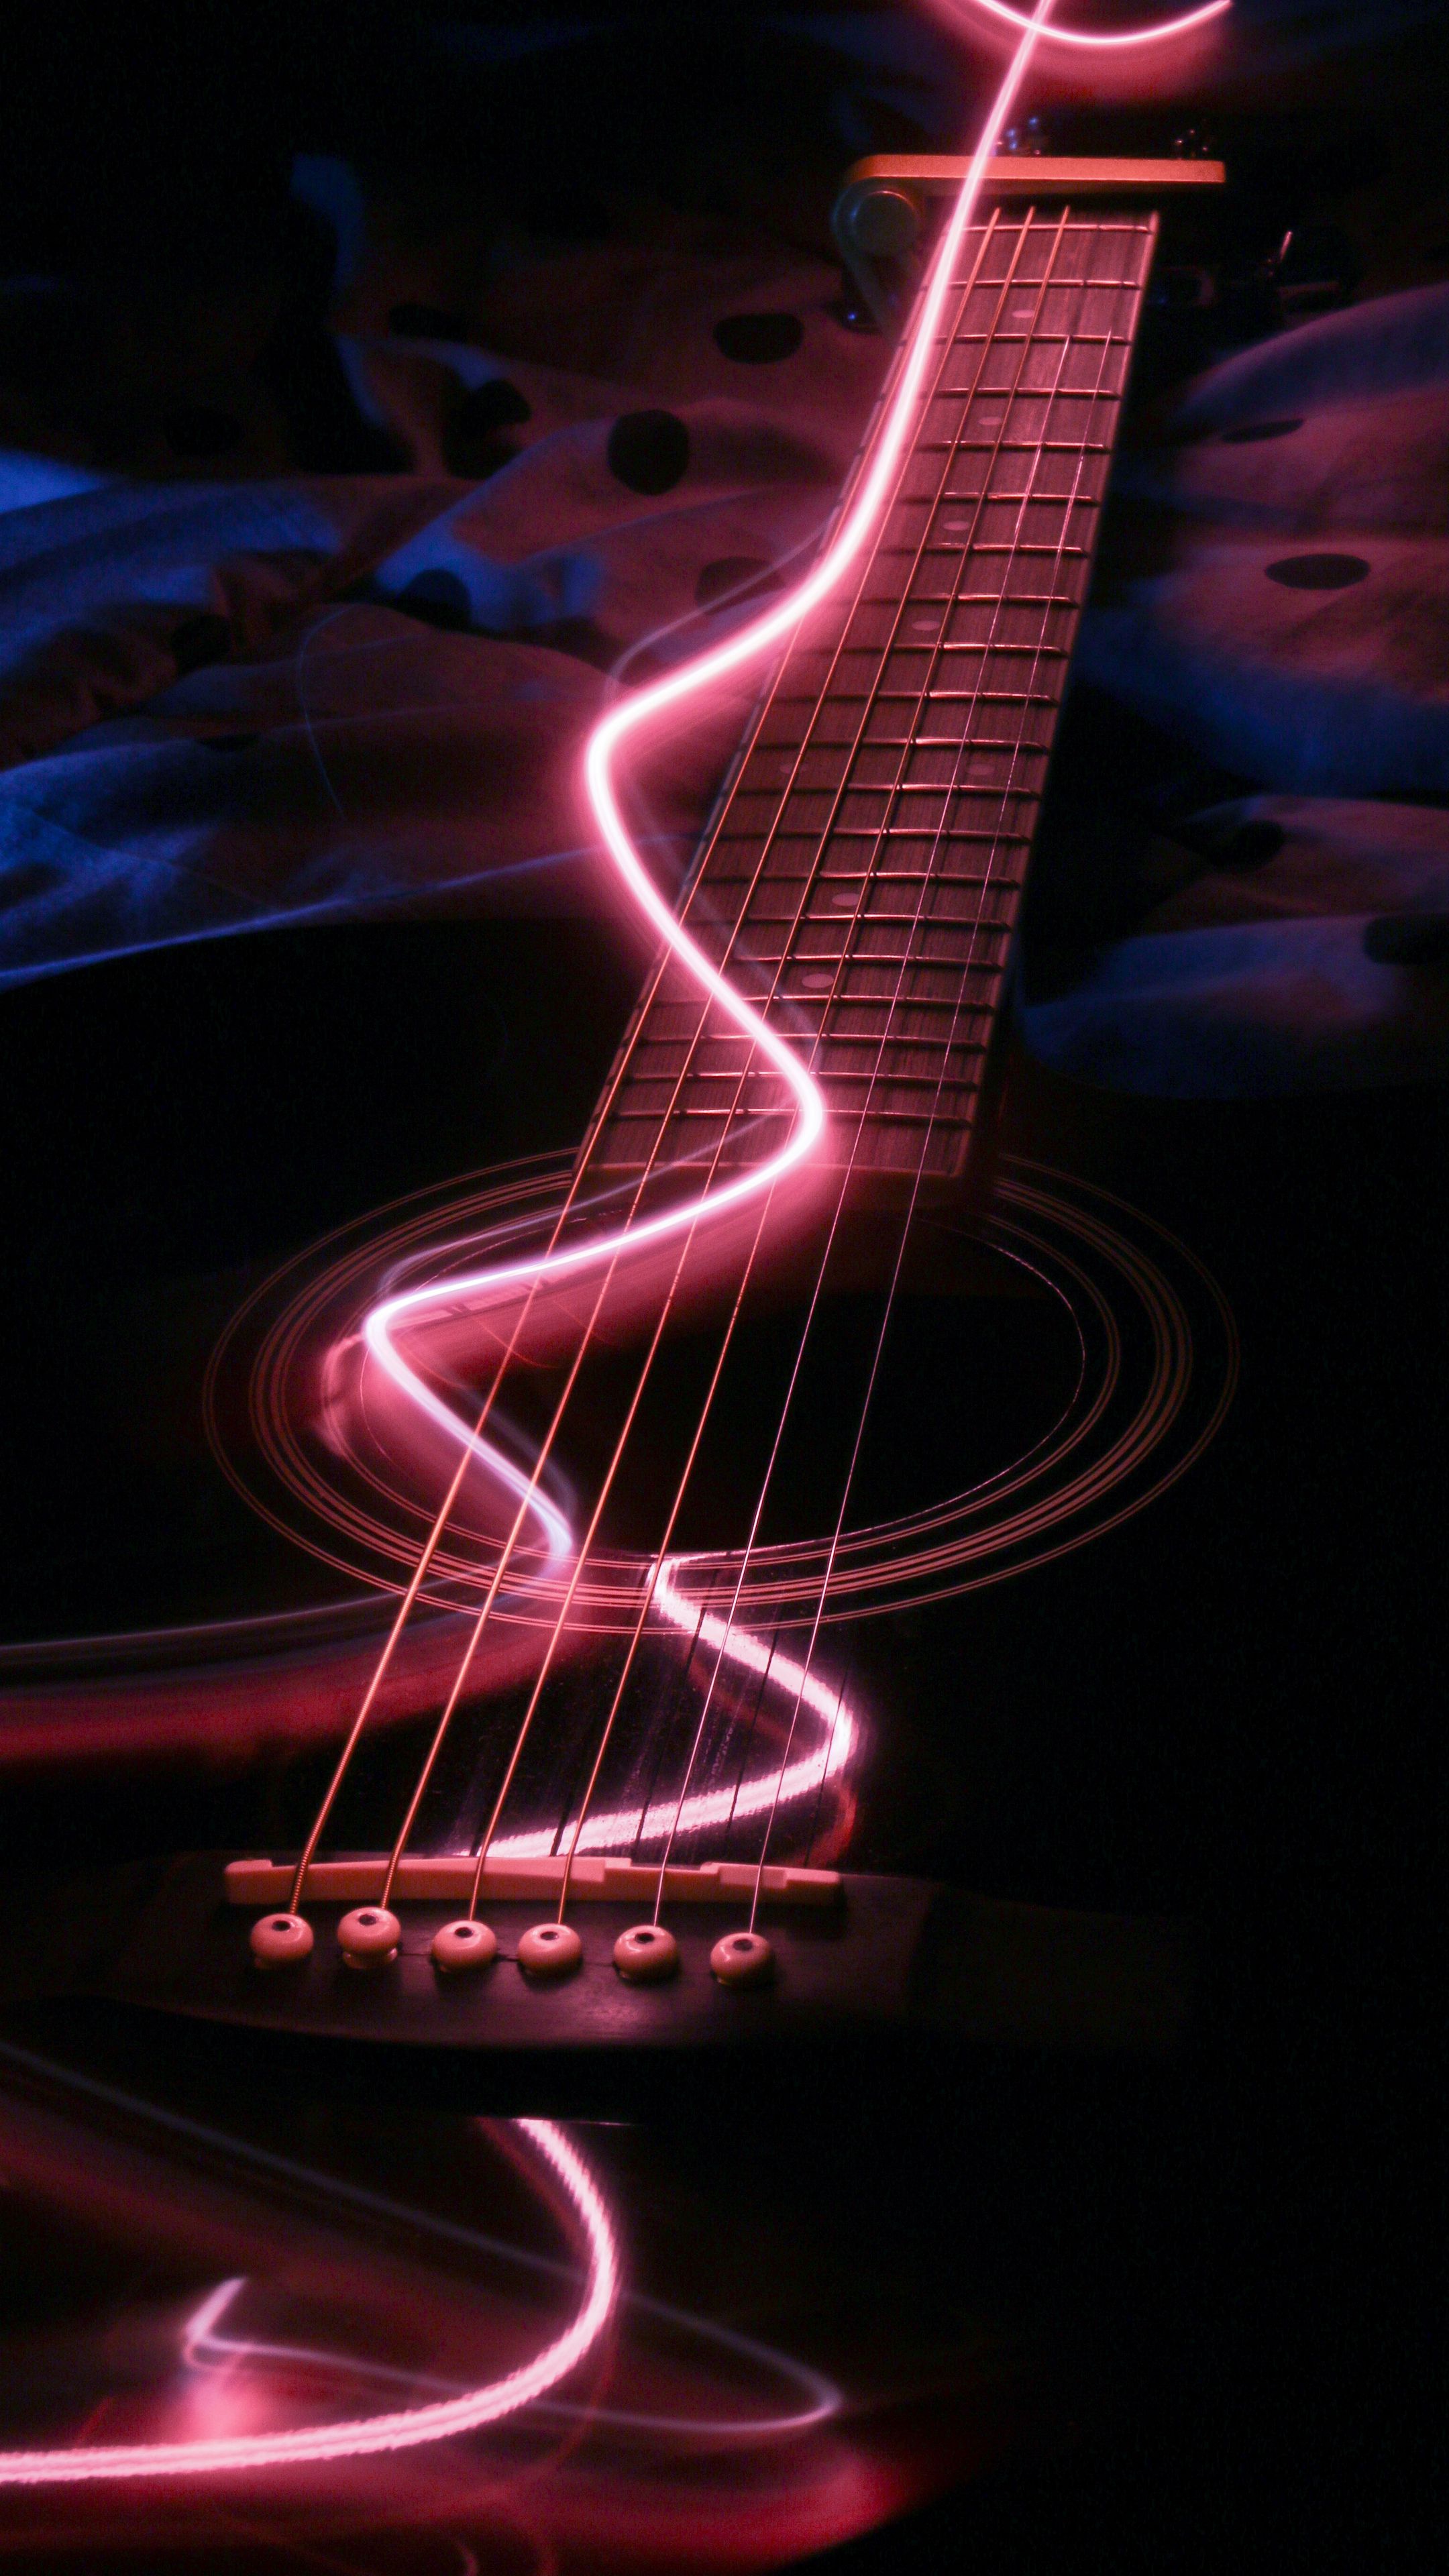 Download wallpaper 2160x3840 guitar, musical instrument, neon, backlight  samsung galaxy s4, s5, note, sony xperia z, z1, z2, z3, htc one, lenovo  vibe hd background